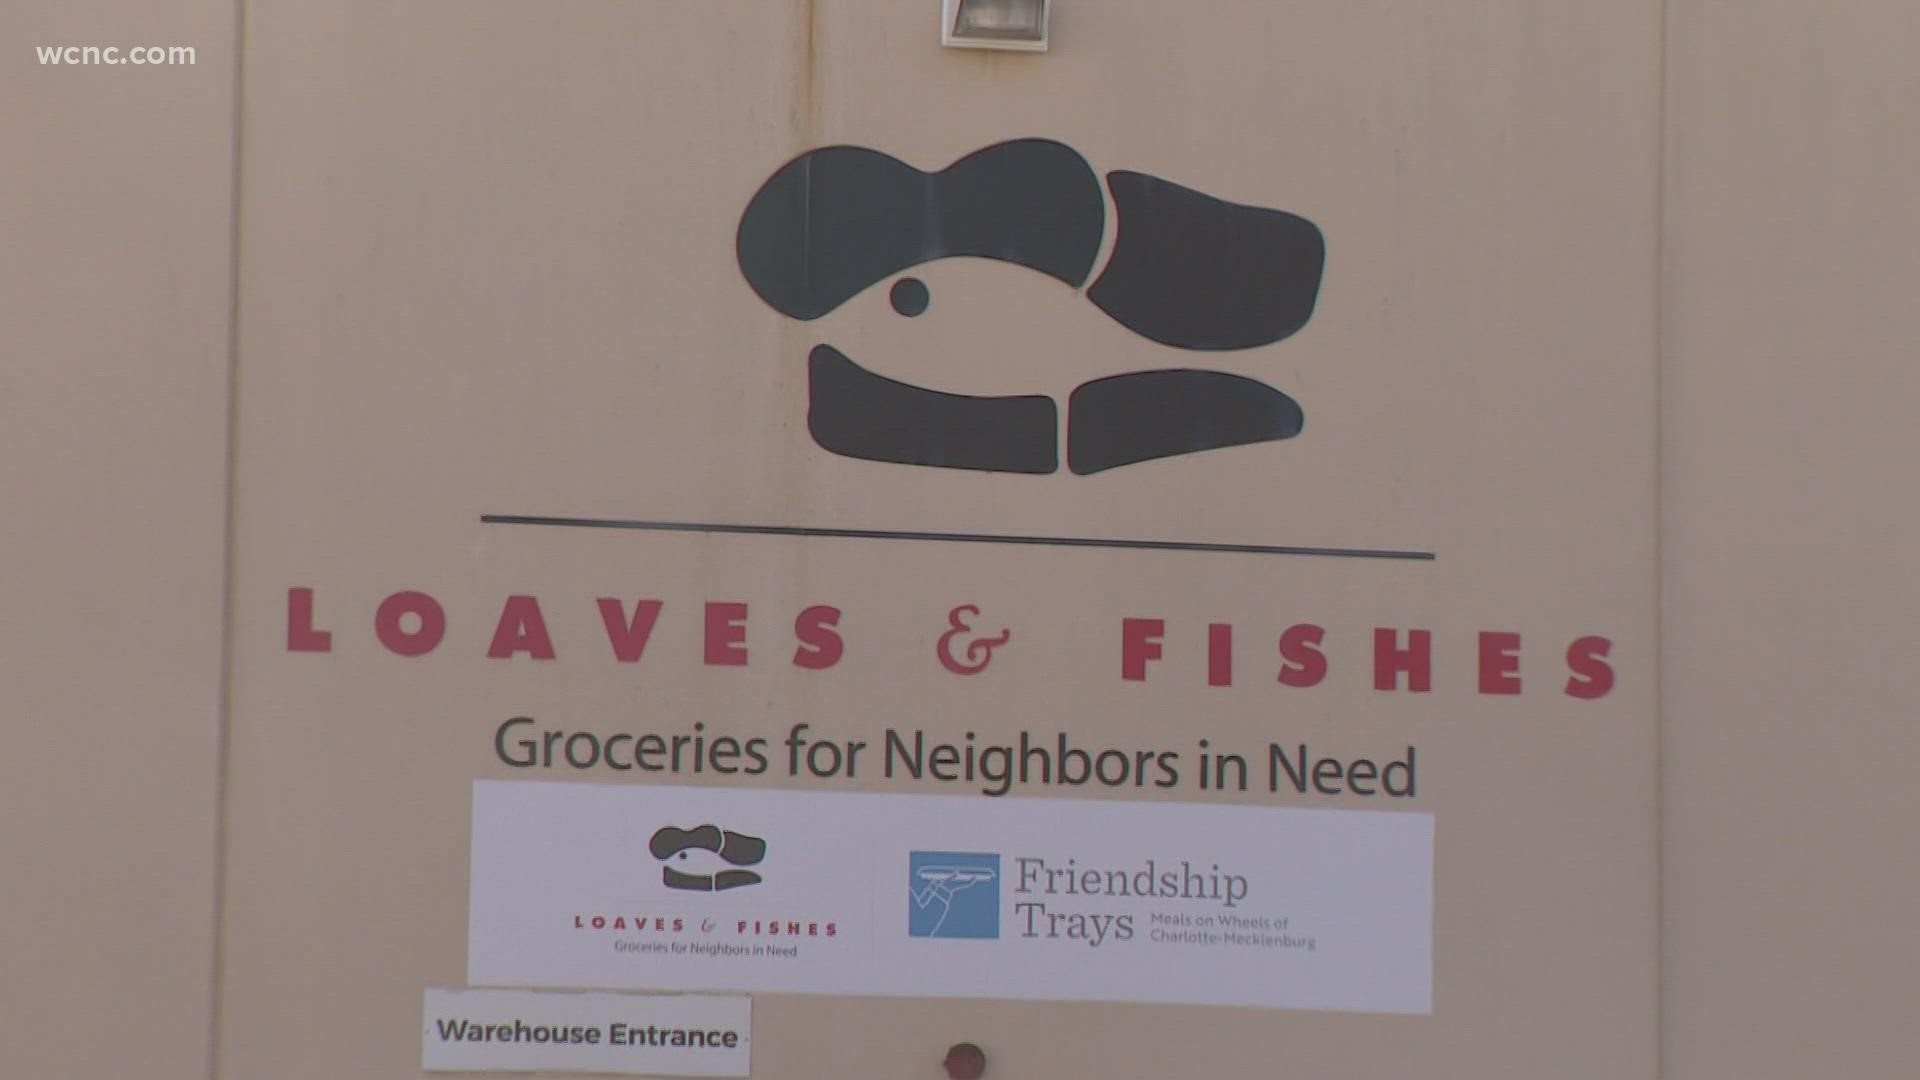 It's that time of year: Everyone is gearing up for the holidays. Loaves and Fishes is counting on more people to help feed those in need.